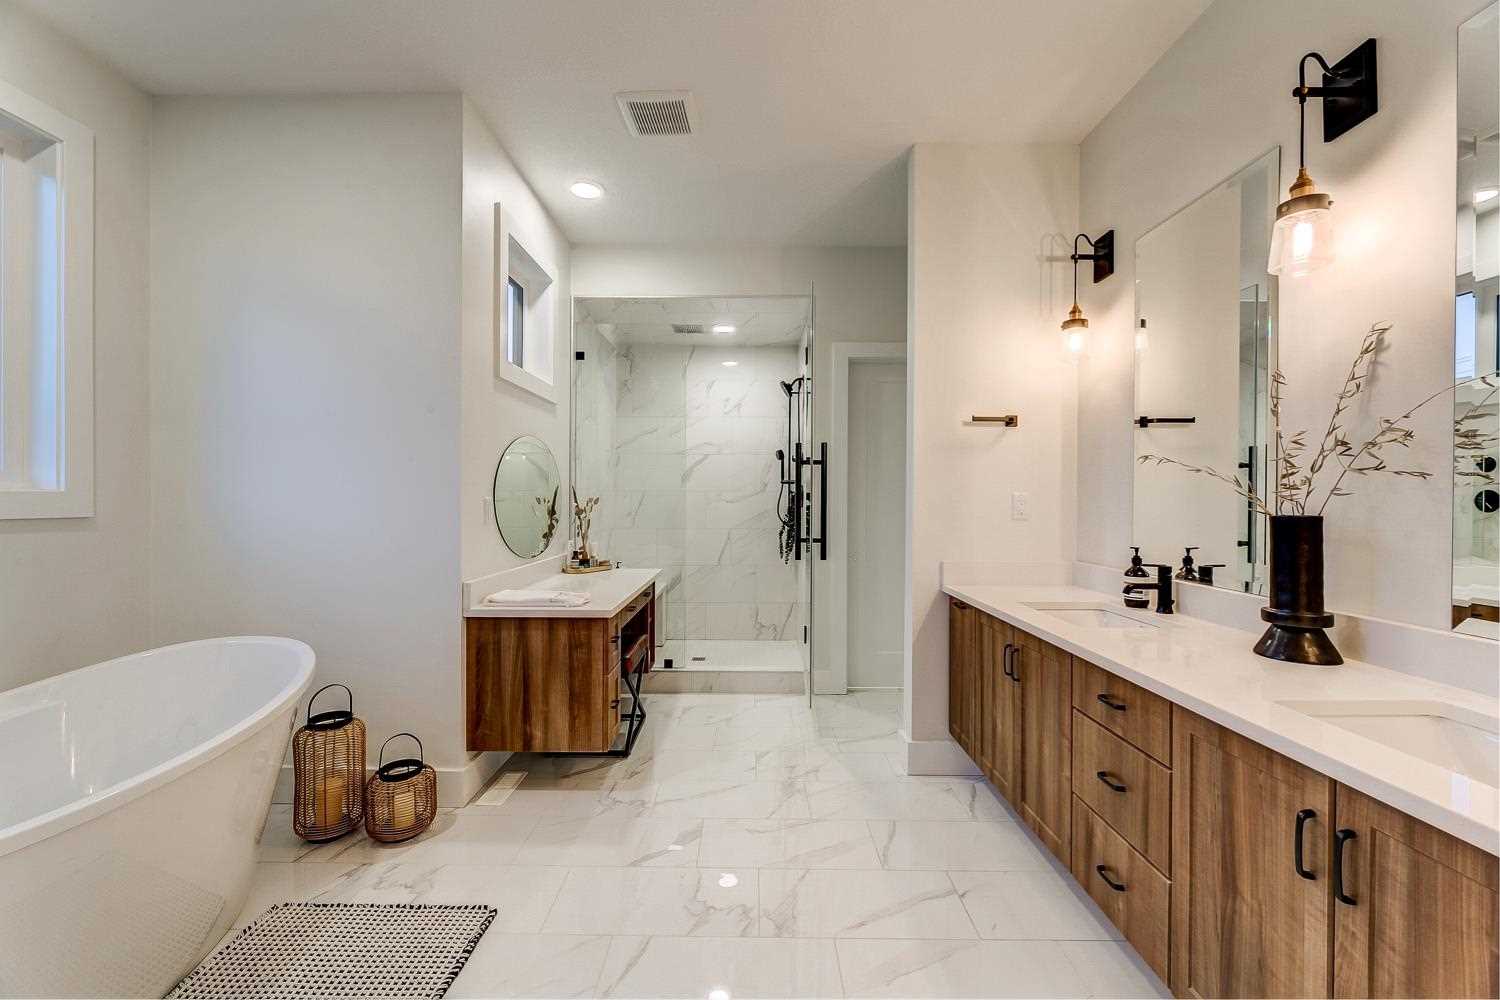 En suite bathroom with white ceiling and walls, light hardwood floor; wood cupboards and large mirror on right; glass shower in background with wood makeup counter with round mirror in front; white soaker tub to the left